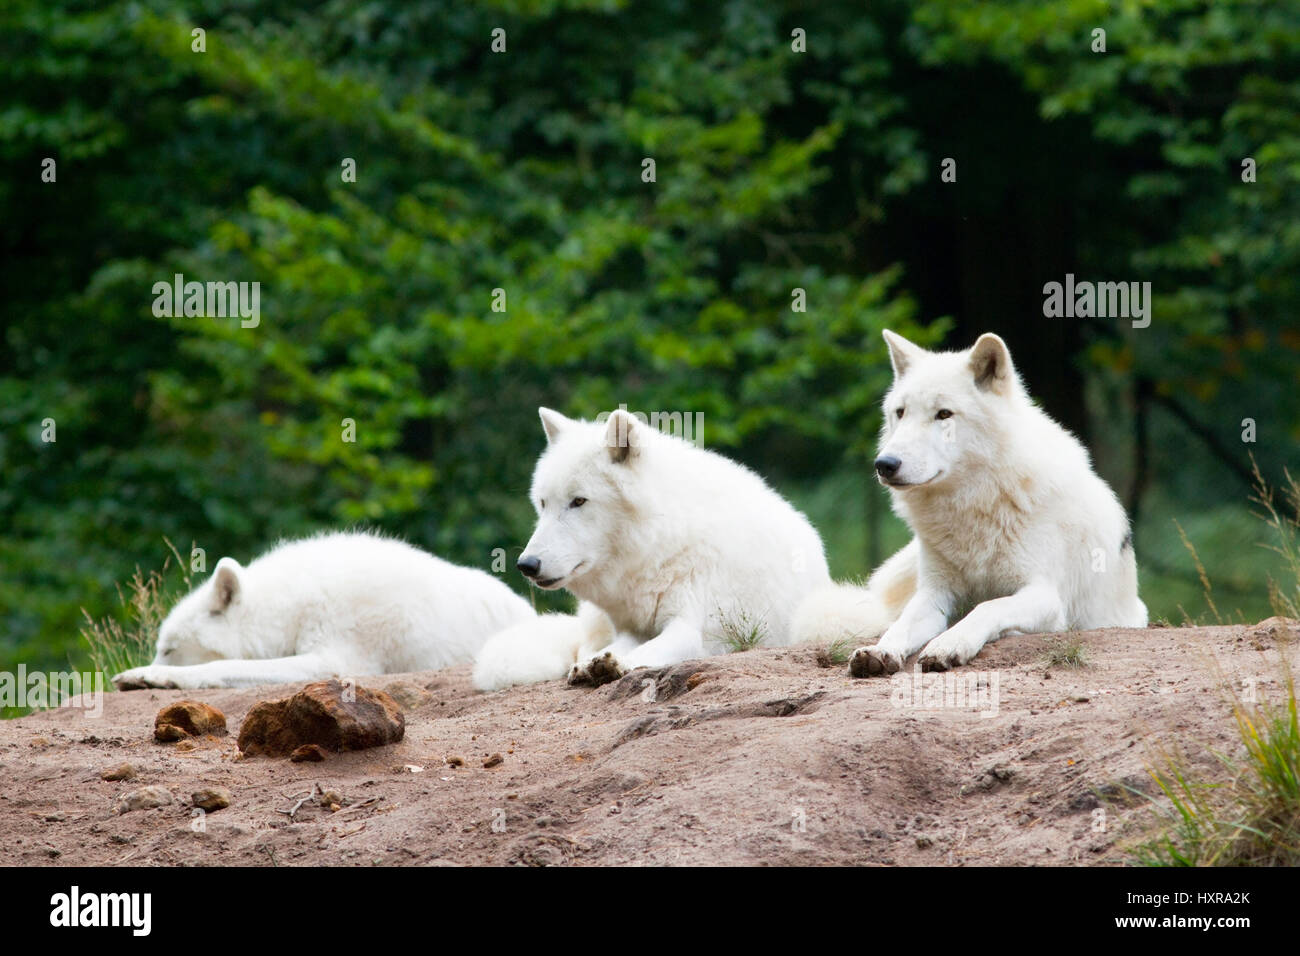 Tundra wolves, Canis lupus albus, by publication brag: Game park old Fasanerie Klein-Auheim, Tundrawölfe,Canis lupus albus, bei Veröffentlichung angeb Stock Photo